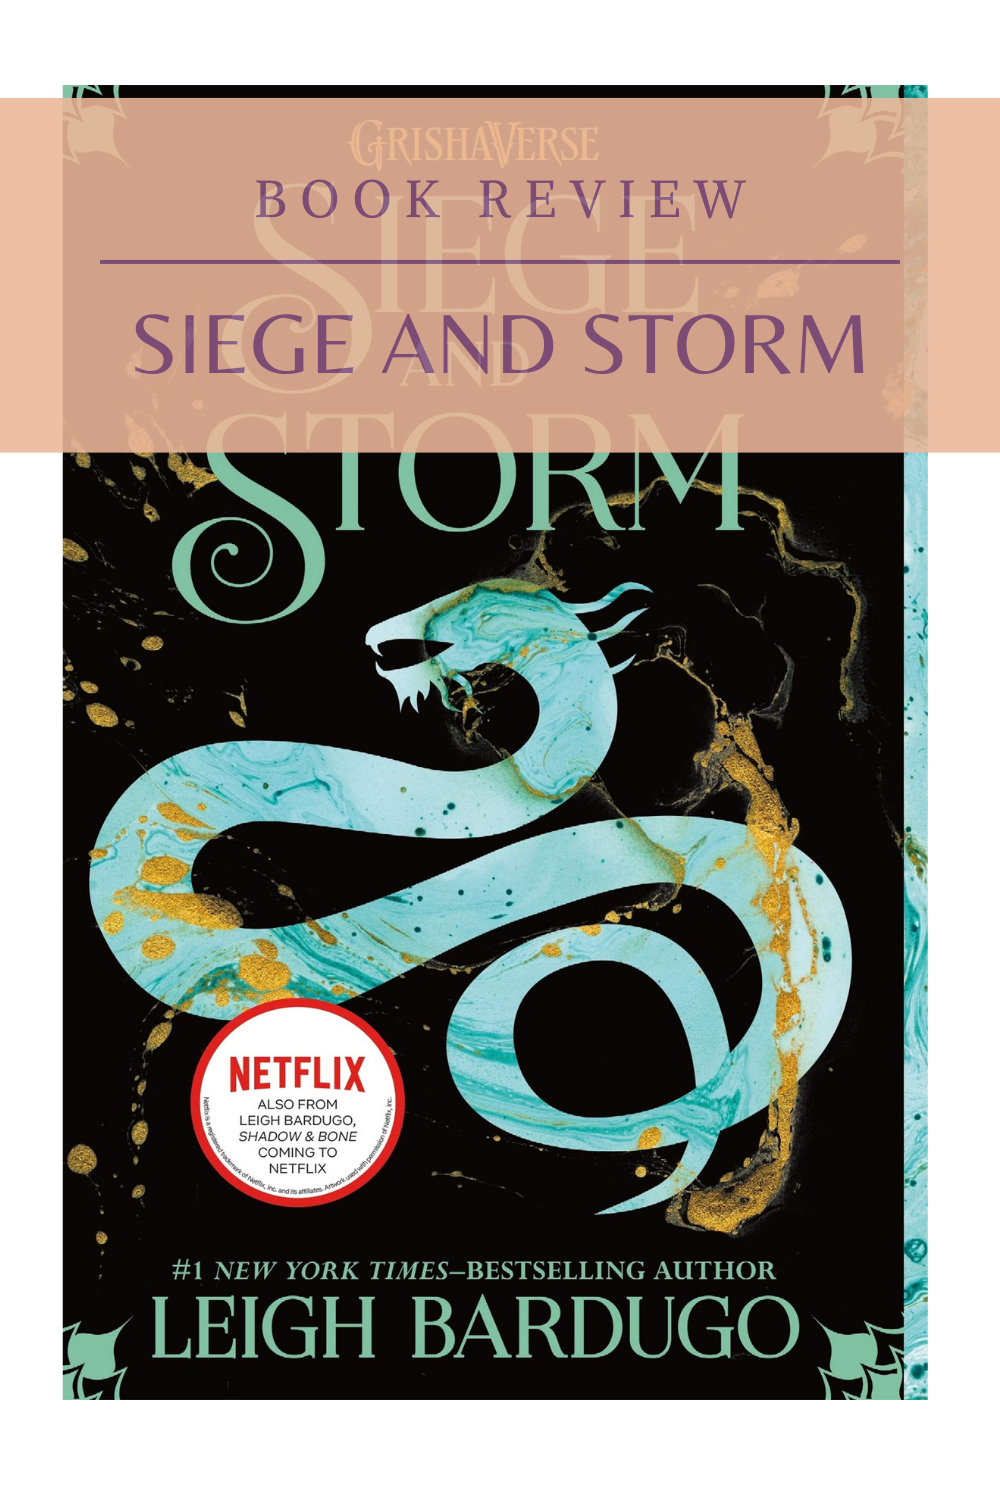 Siege and Storm by Leigh Bardugo | Book Review